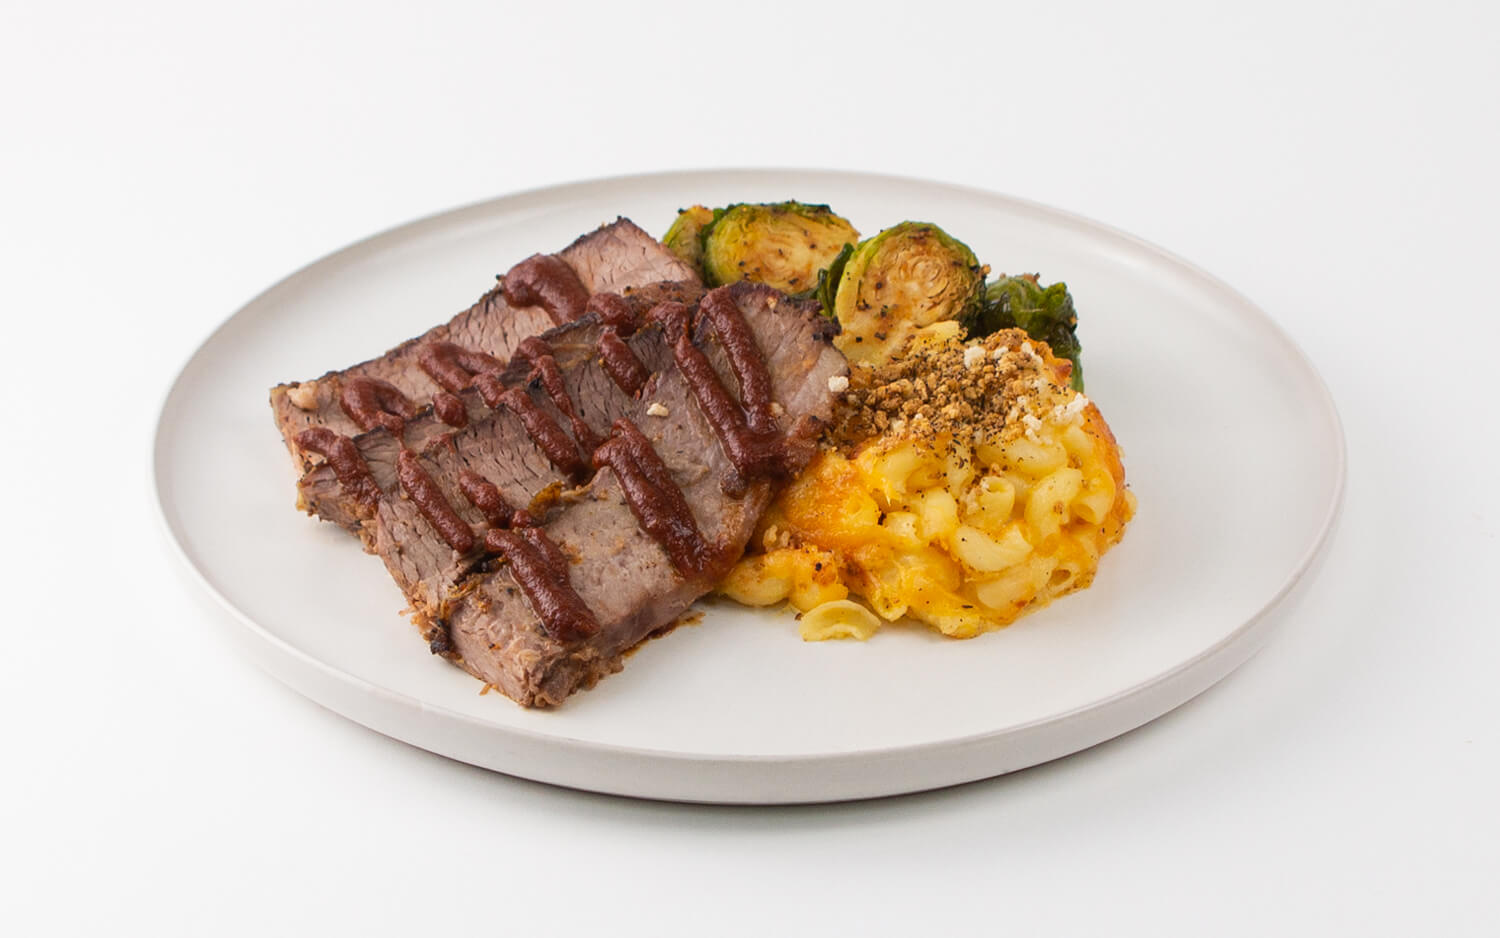 Slow-cooked BBQ Brisket with Southern Style Cheddar Mac and Cheese with roasted Brussels sprouts. 